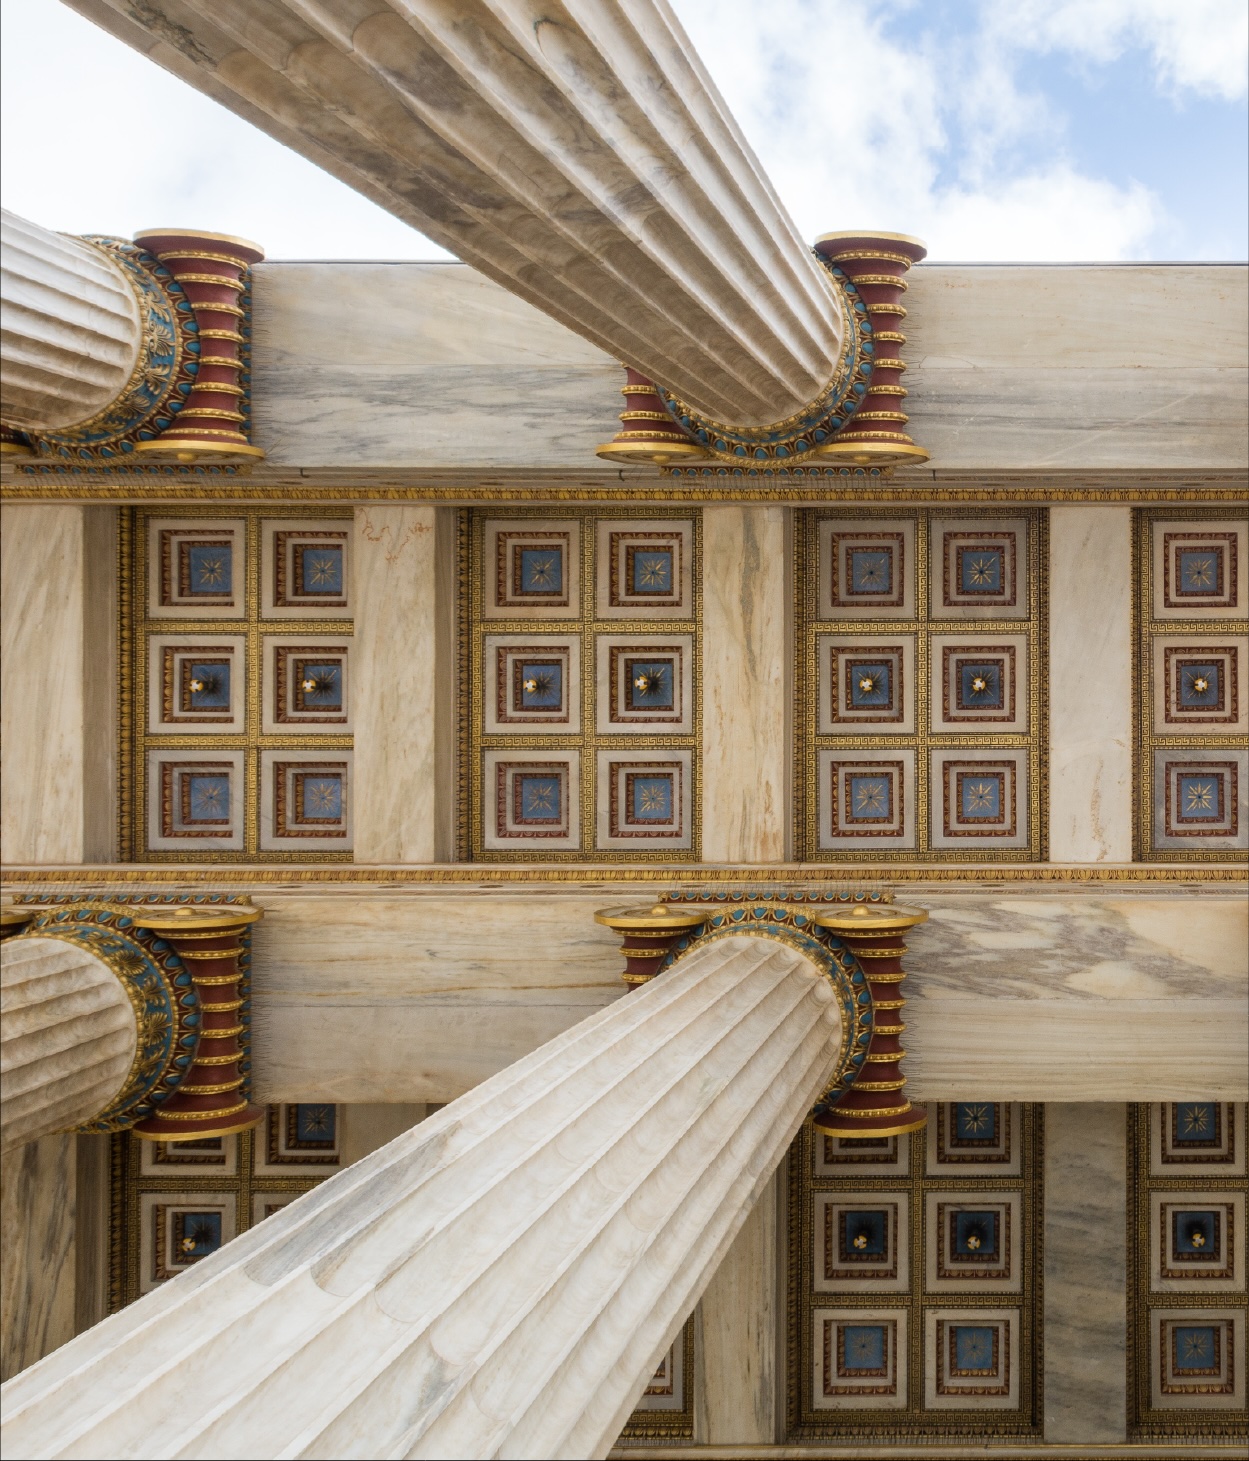 Photo of a statehouse's neoclassical roof with columns.